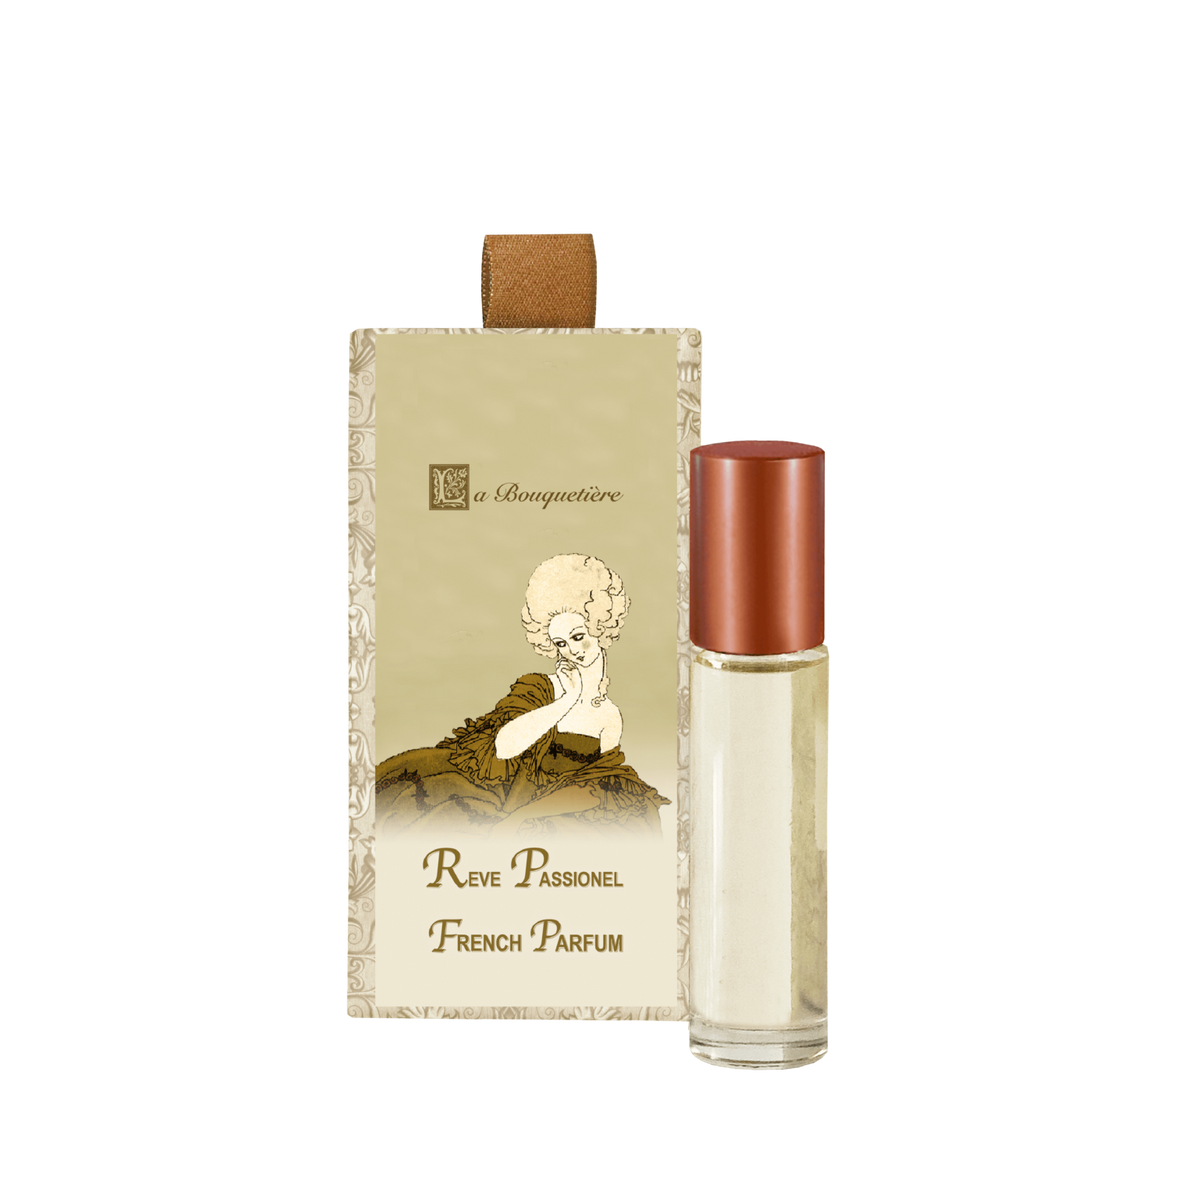 A La Bouquetiere Reve Passionnel Perfume Roller bottle alongside its packaging, which features a vintage-style illustration of a cherub on a beige background.